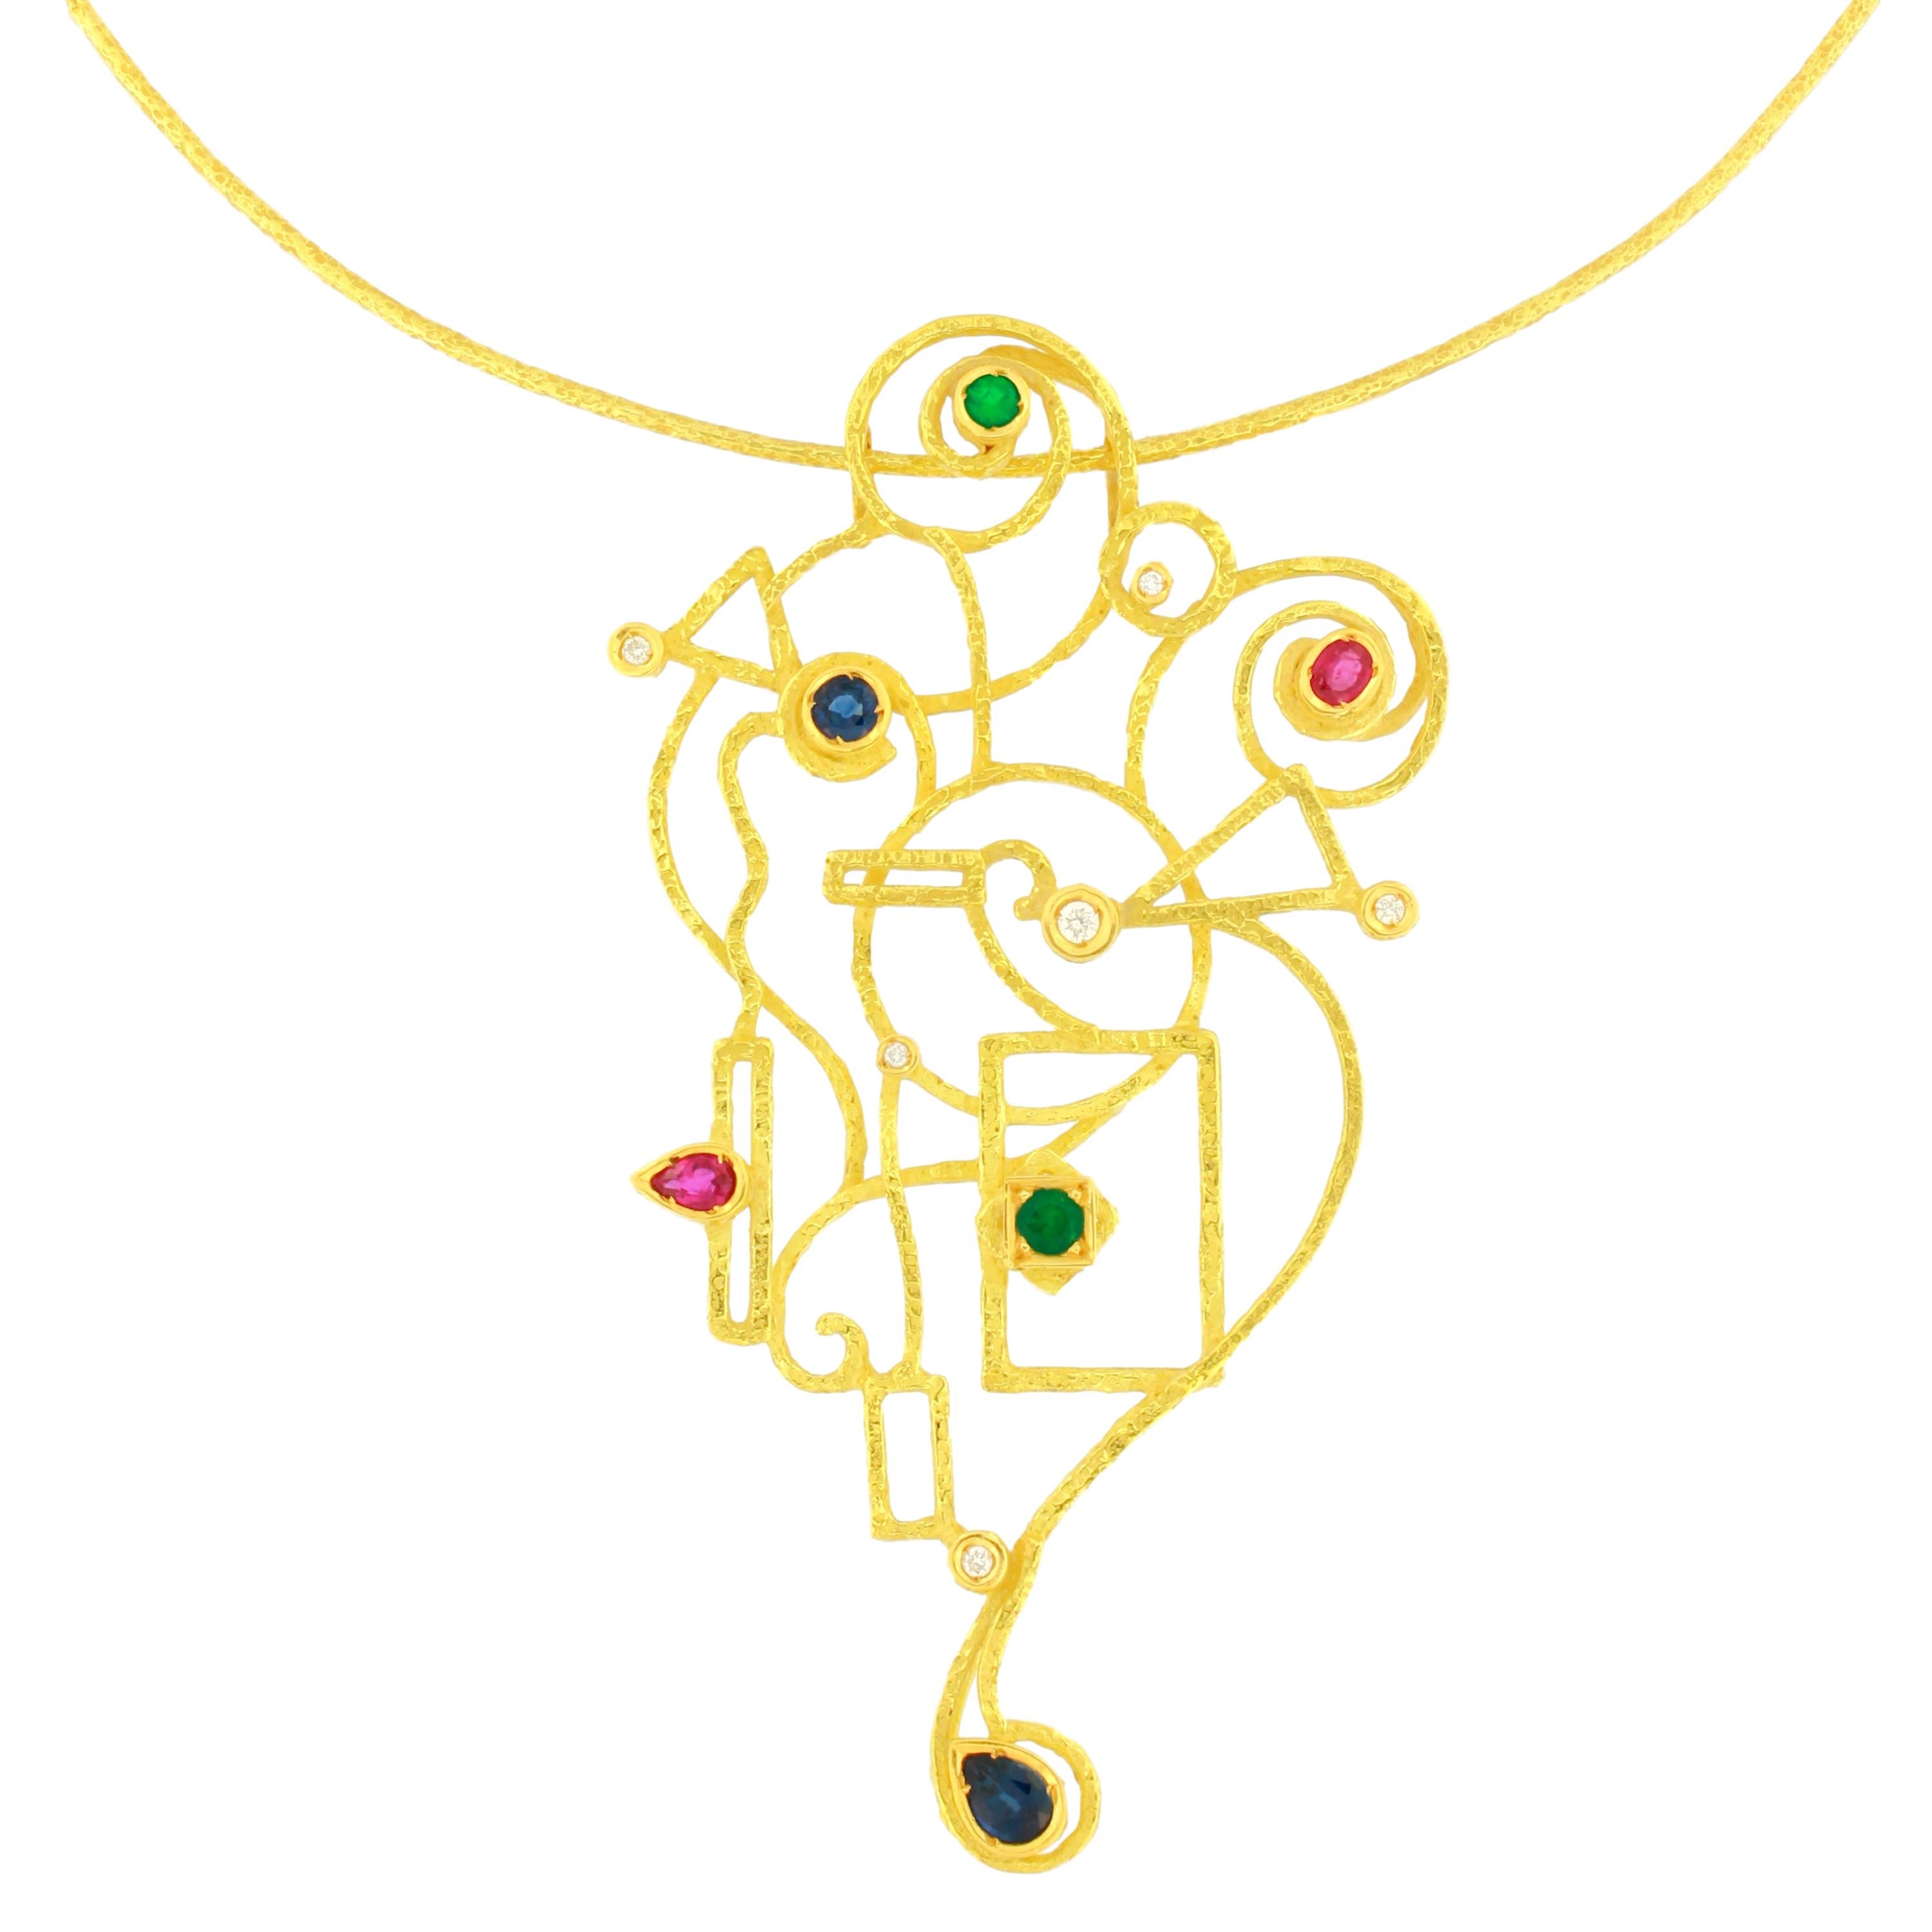 Gorgeous Satin Yellow Gold Pendant Necklace embellished with Multi-Color Precious Gemstones, from Sacchi’s “Klimt” Collection, hand-crafted with lost-wax casting technique.

Lost-wax casting, one of the oldest techniques for creating jewelry, forms